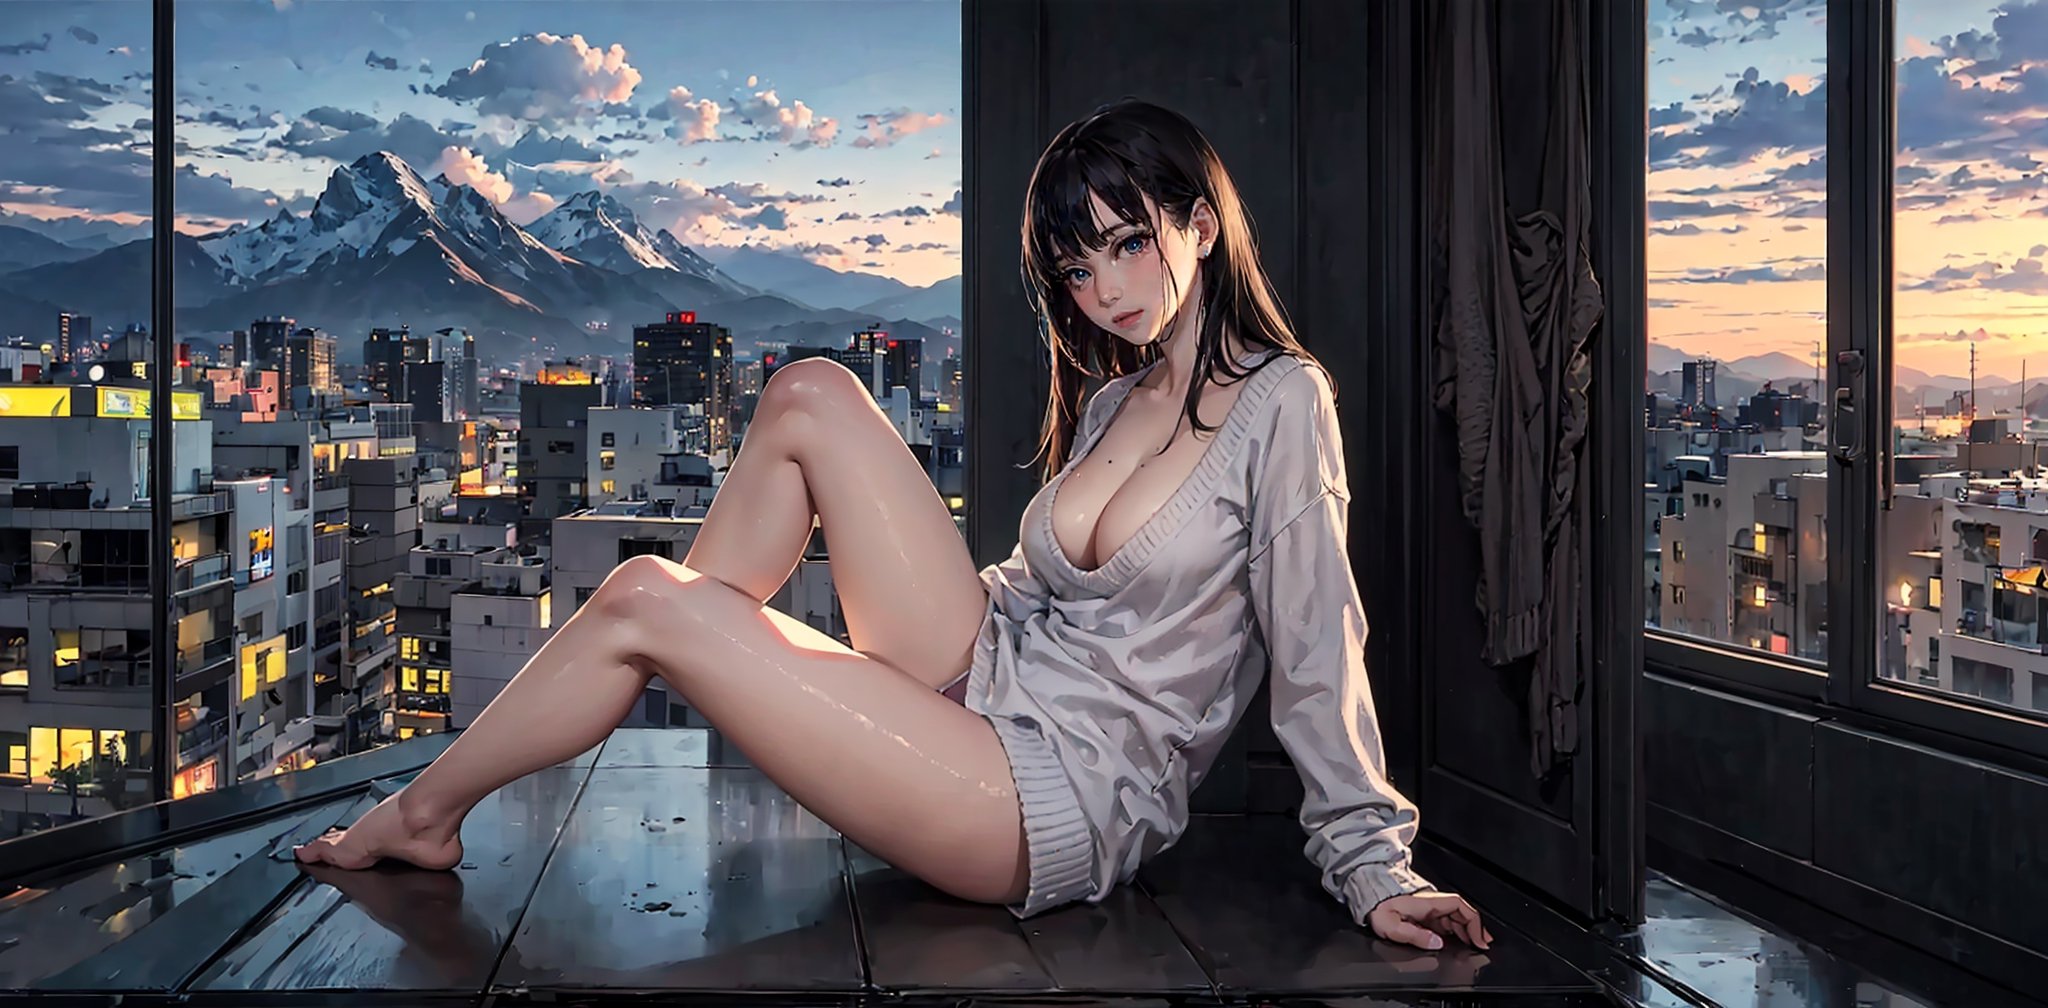 Masterpiece, Best quality, offcial art, Extremely detailed Cg Unity 8K wallpaper, 1girll, 超高分辨率, (Photorealistic:1.4), 1girll, perfect hand, delicated, Chest moles, Bare legs, Sweaters, long sweater, Tight sweater, Wrap over a hip sweater, cleavage,

balcony, mountain view, amazing sky, cloudy_sky